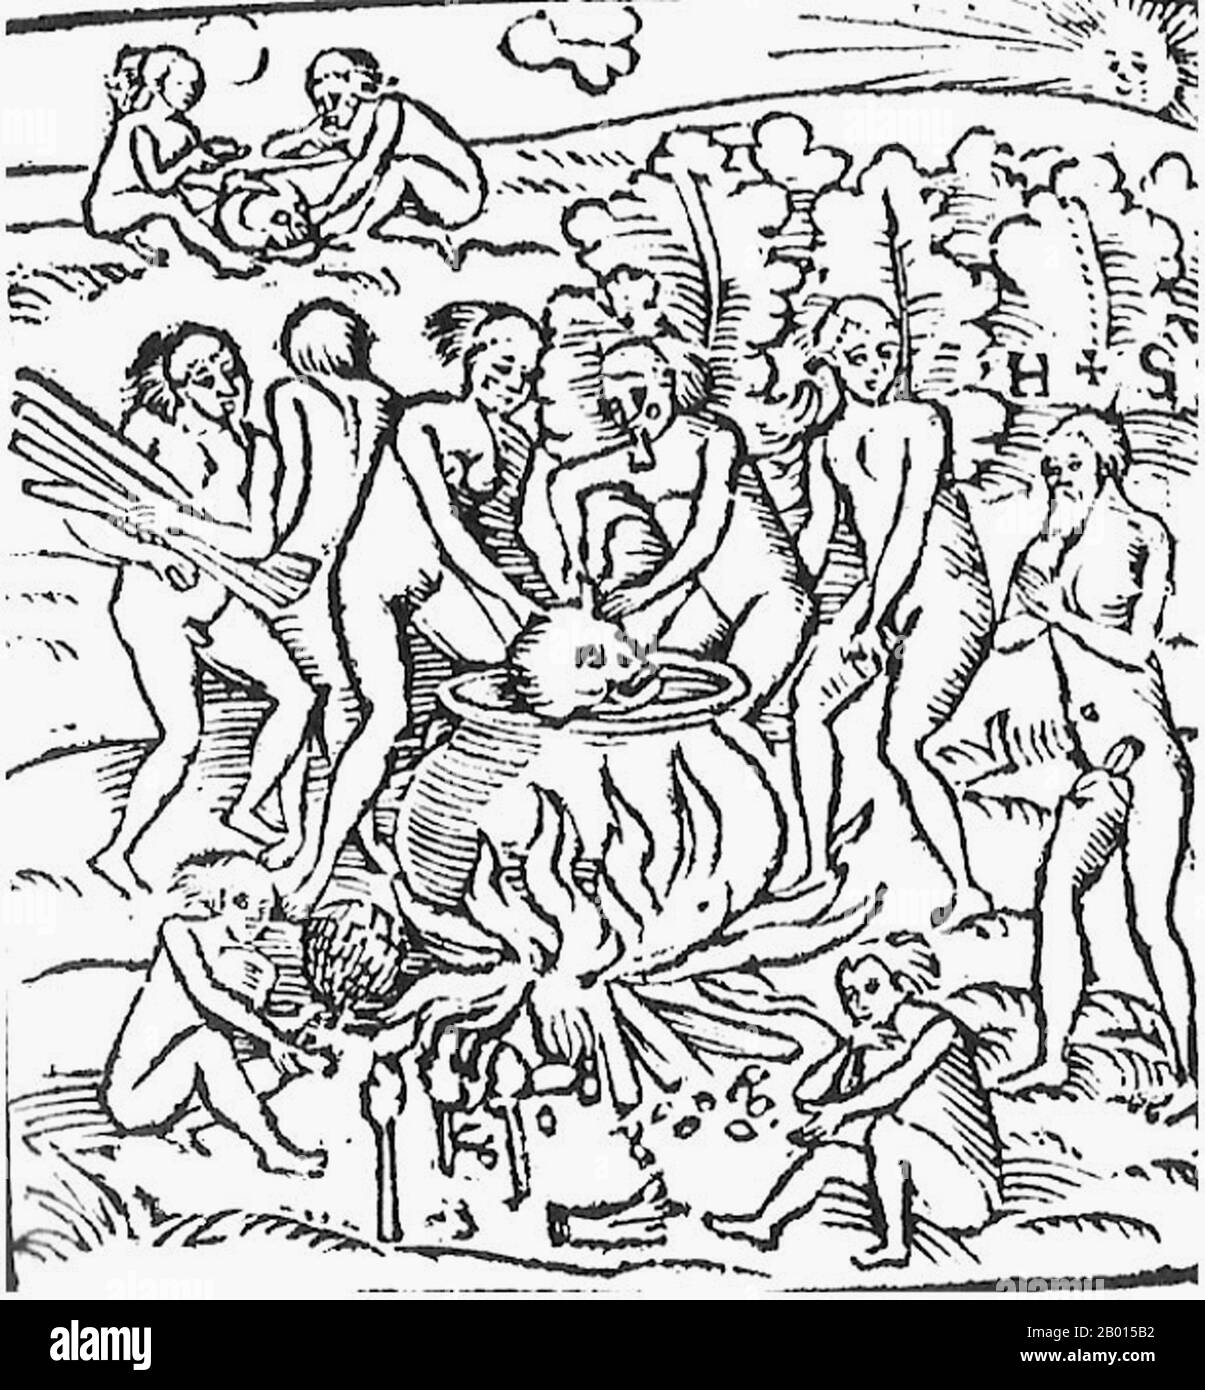 Brazil: Cannibalism in Brazil in 1557 as alleged by Hans Staden. Woodcut print by an unidentified artist, c. 1557.  Hans Staden (c. 1525 - c. 1579) was a German soldier and mariner who voyaged to South America. On one voyage, he was captured by the Tupinamba people of Brazil whom he claimed practiced cannibalism. He wrote a widely read book describing his experiences. Stock Photo